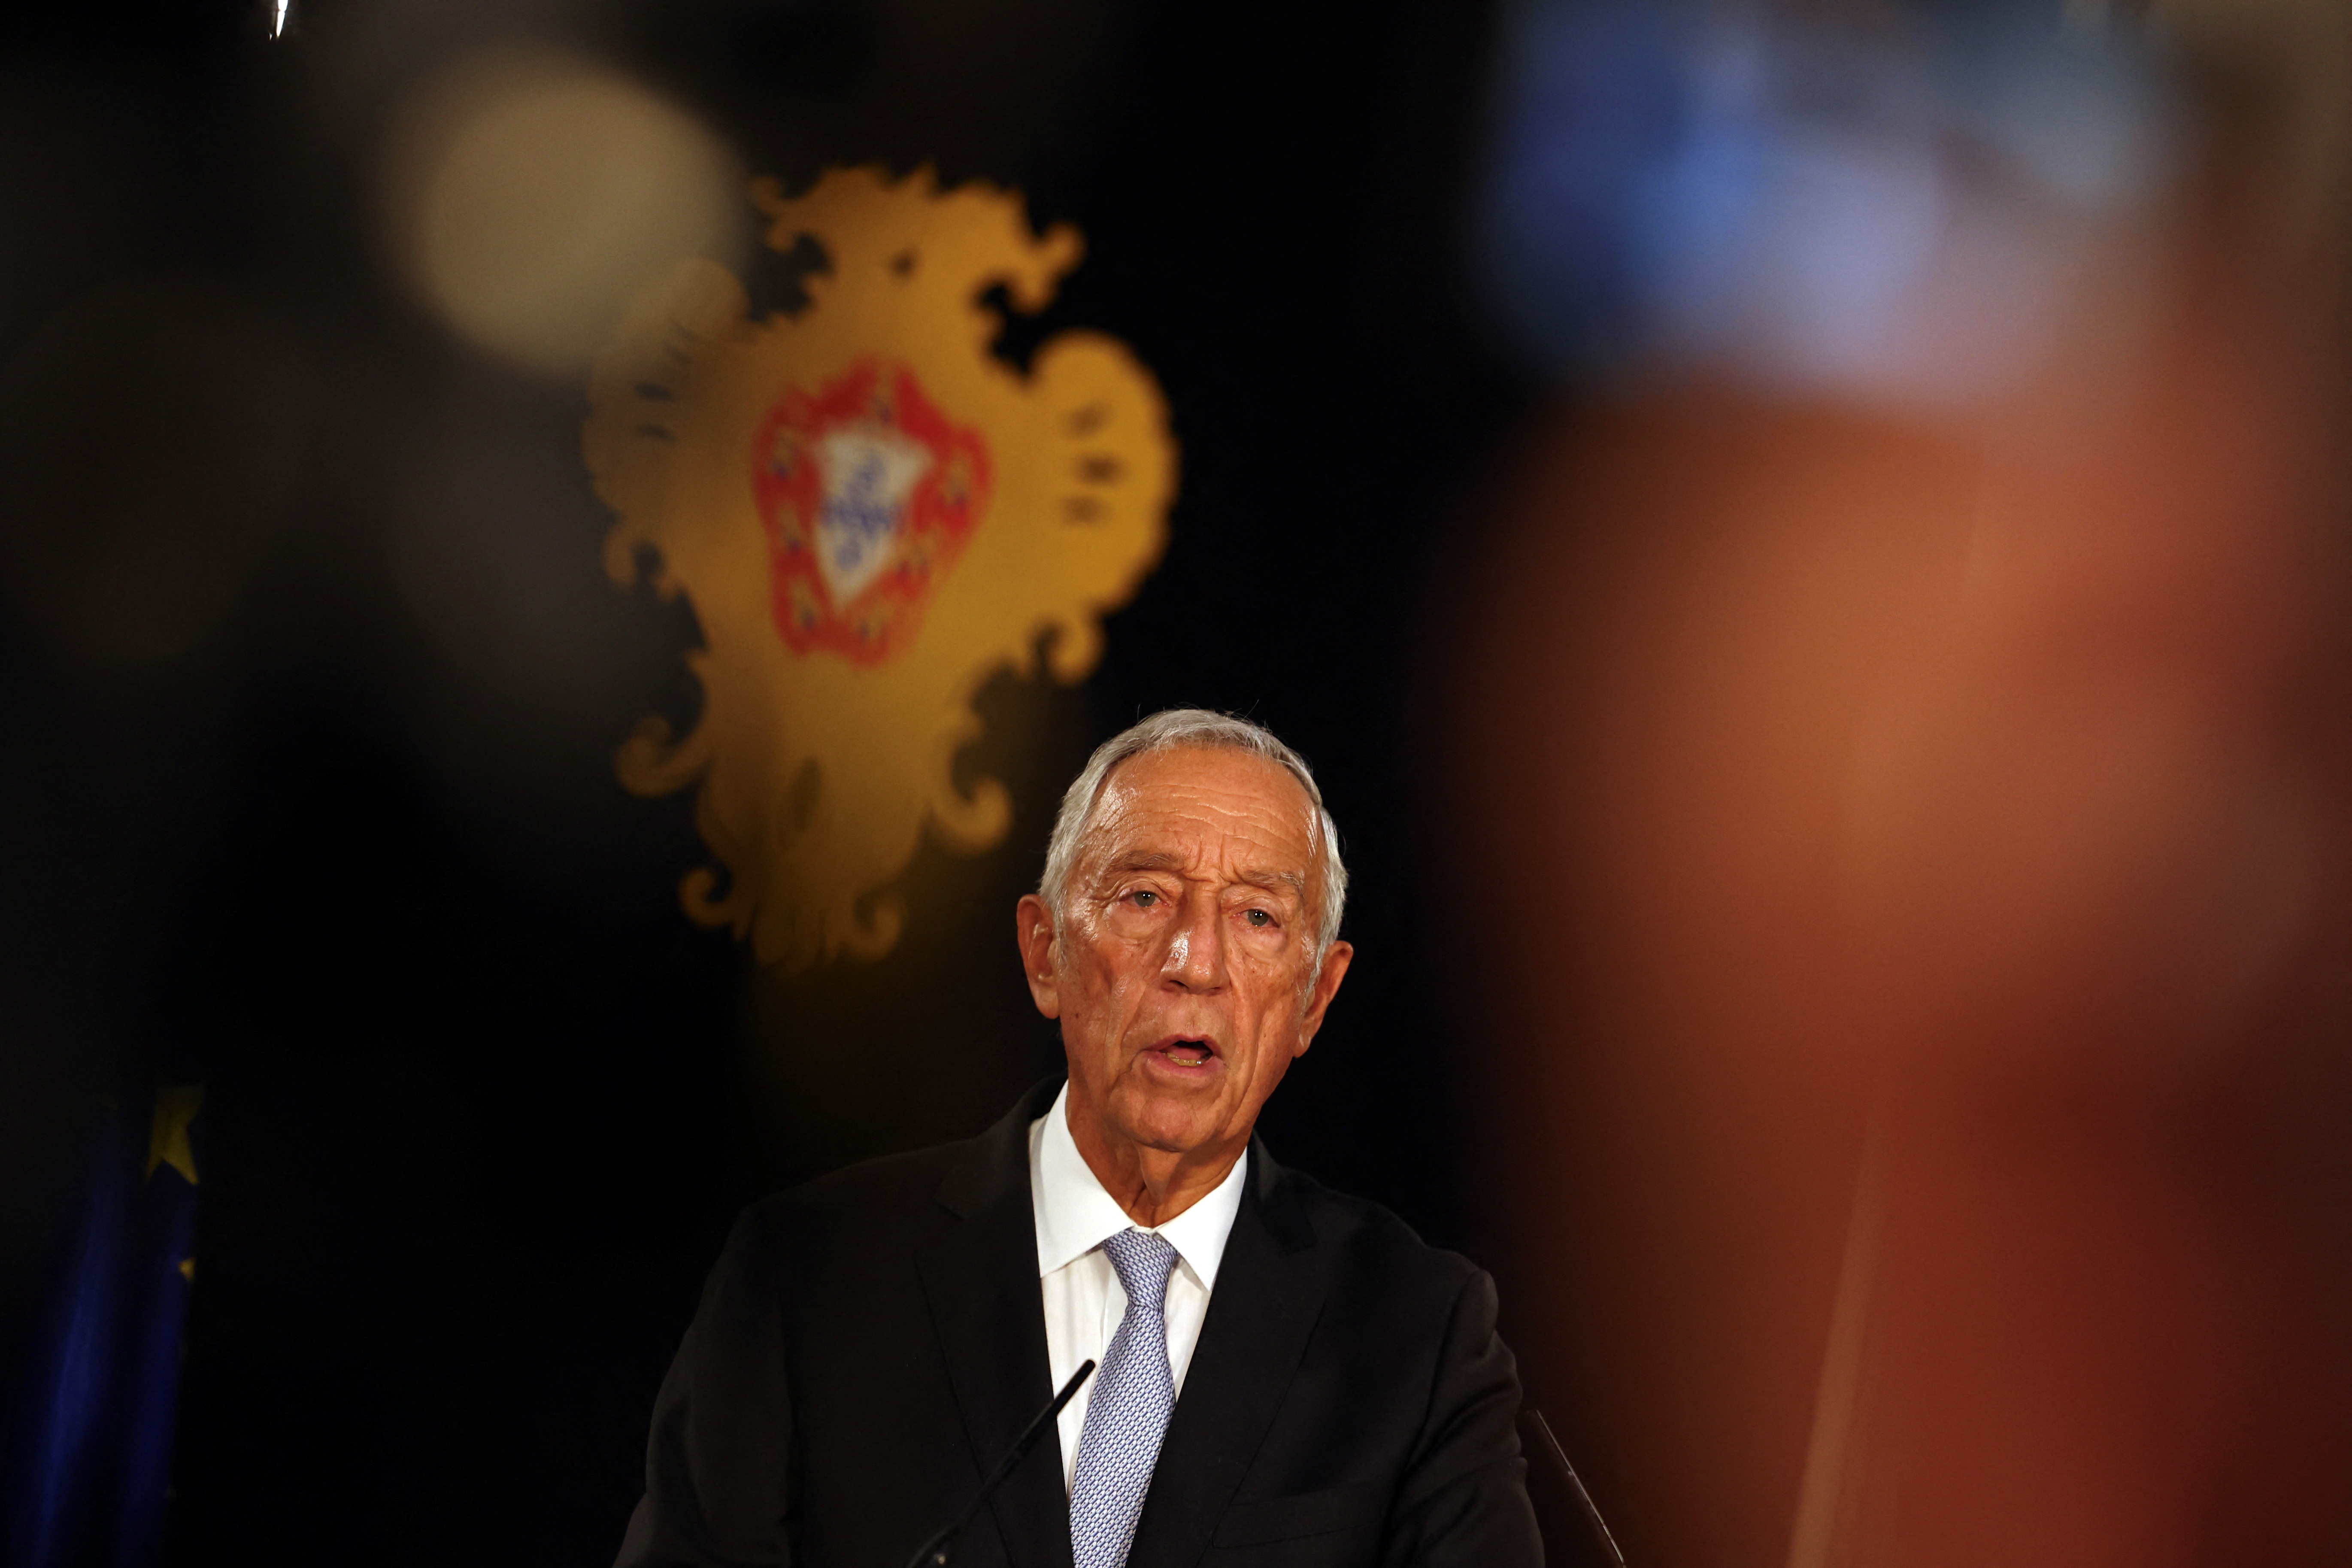 Portugal's President de Sousa addresses the nation from Belem Palace to announce his decision to dissolve parliament, in Lisbon